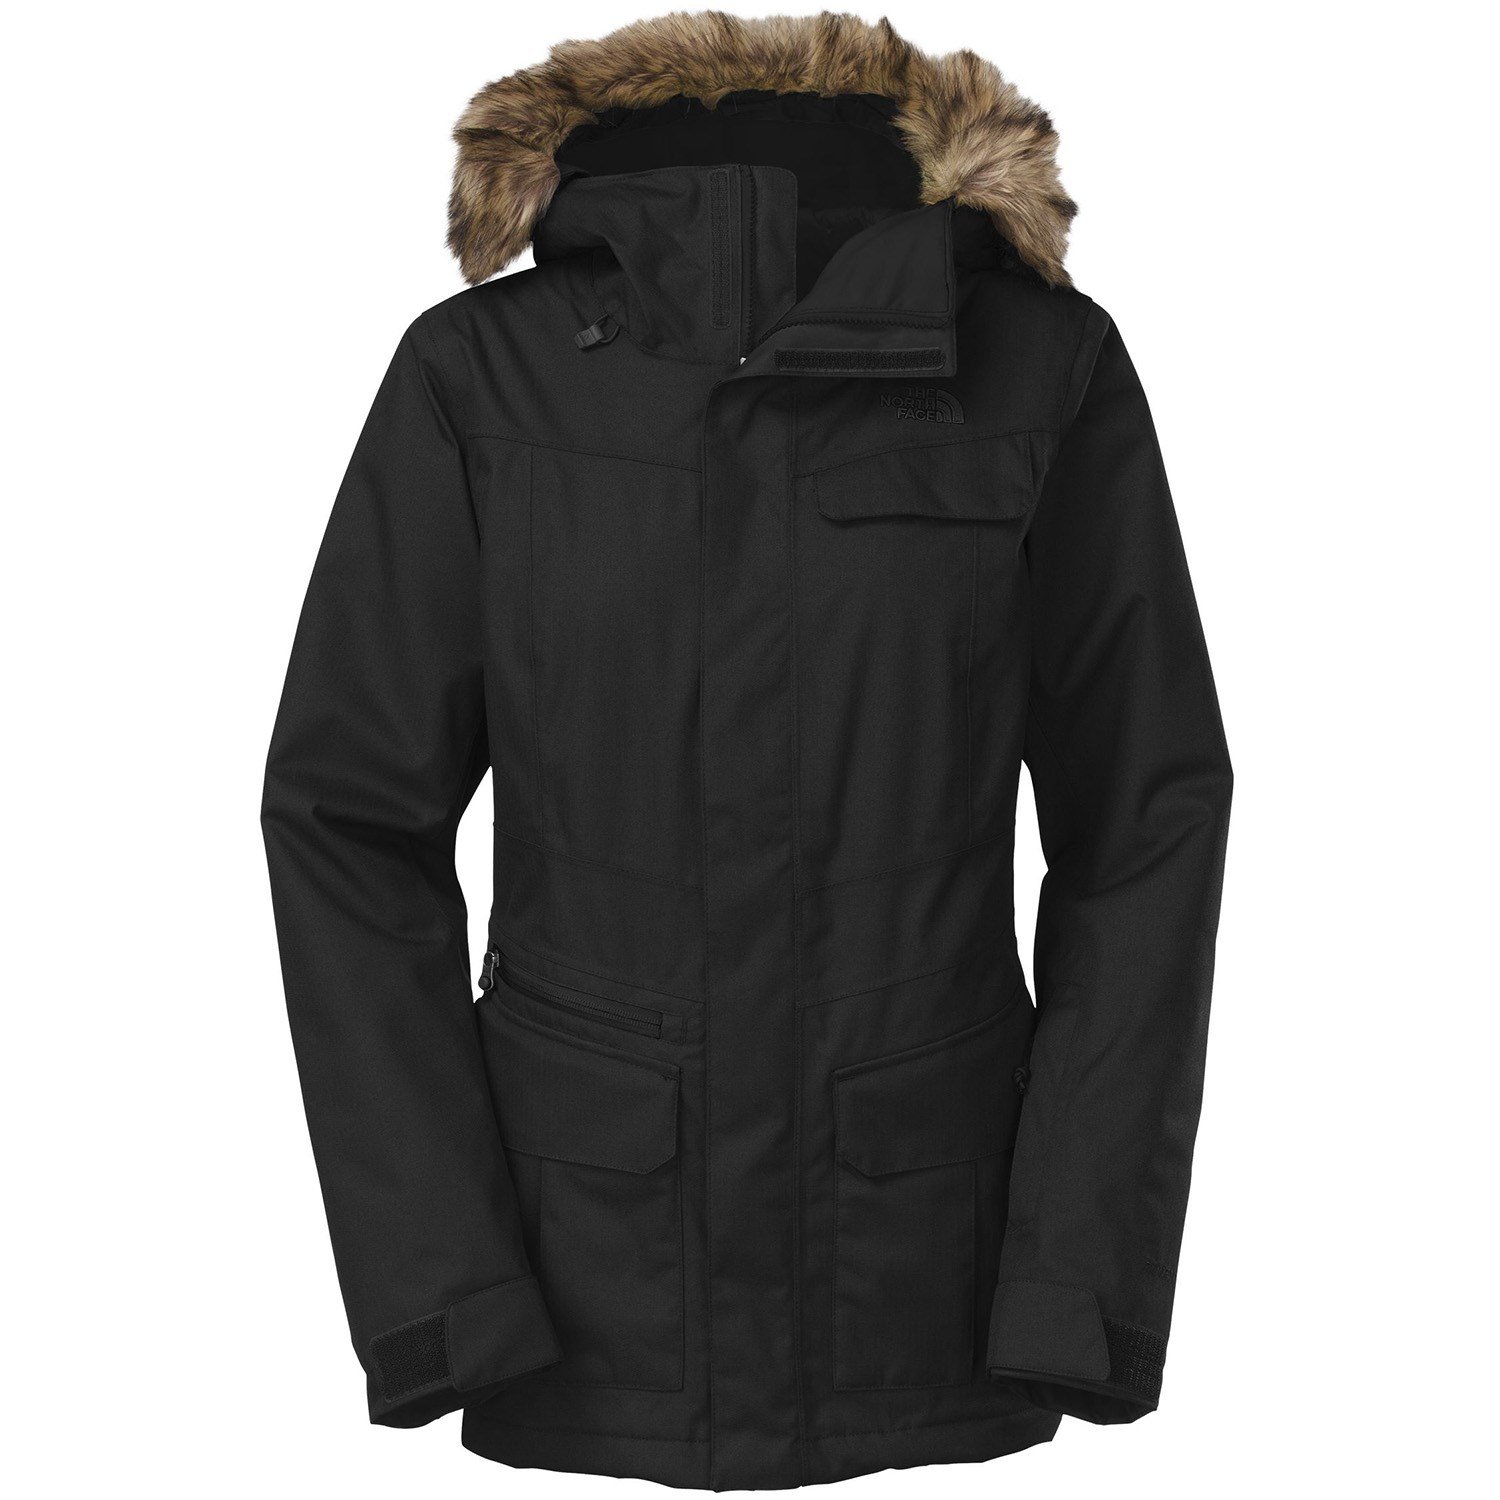 North Face Winter Womens Jackets - Best Jacket 2017